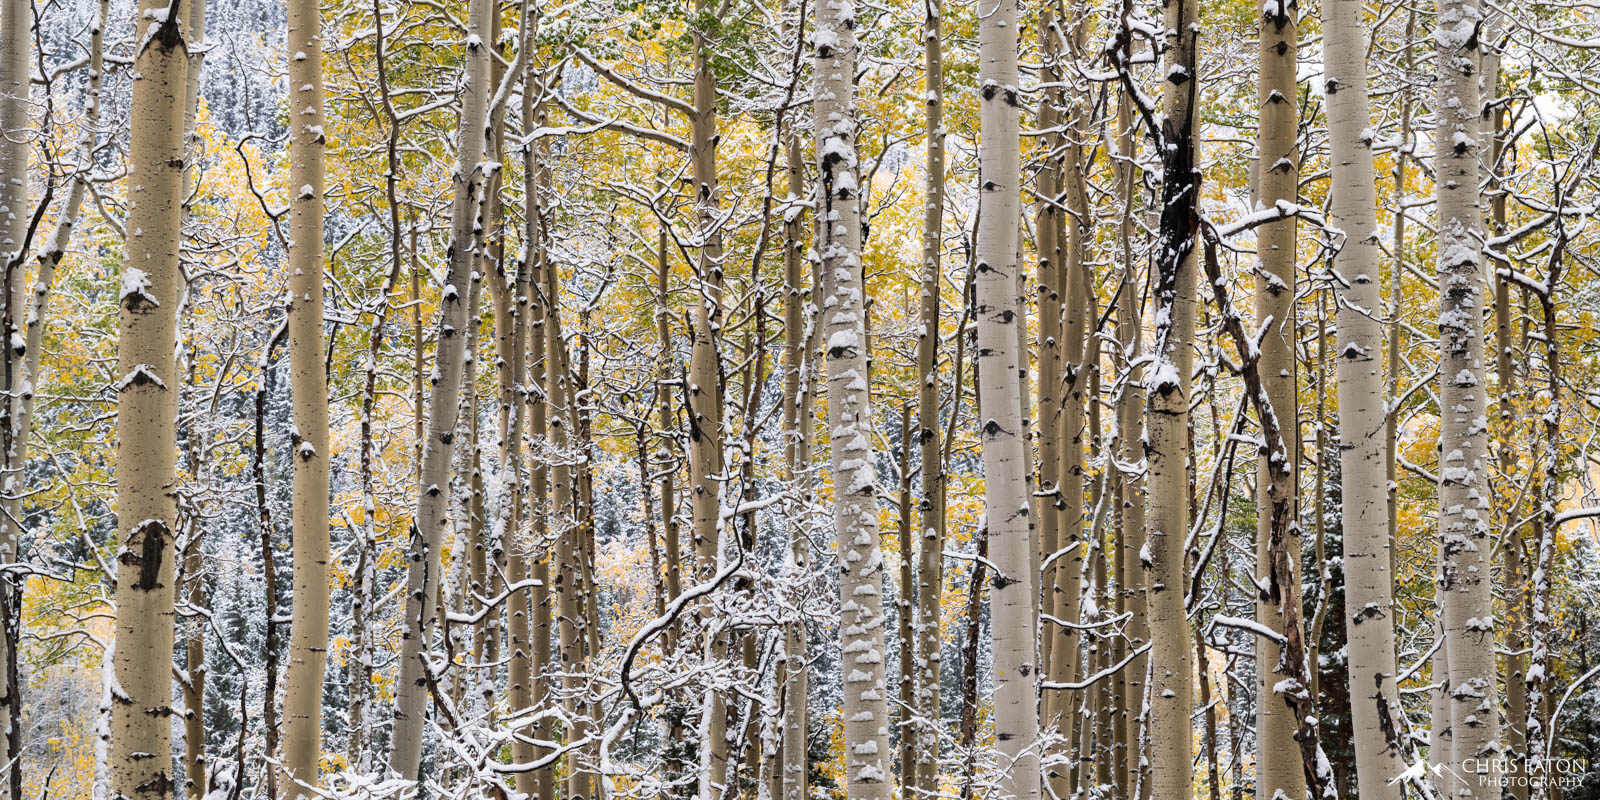 Snow covered aspen trees in Colorado during fall color season.